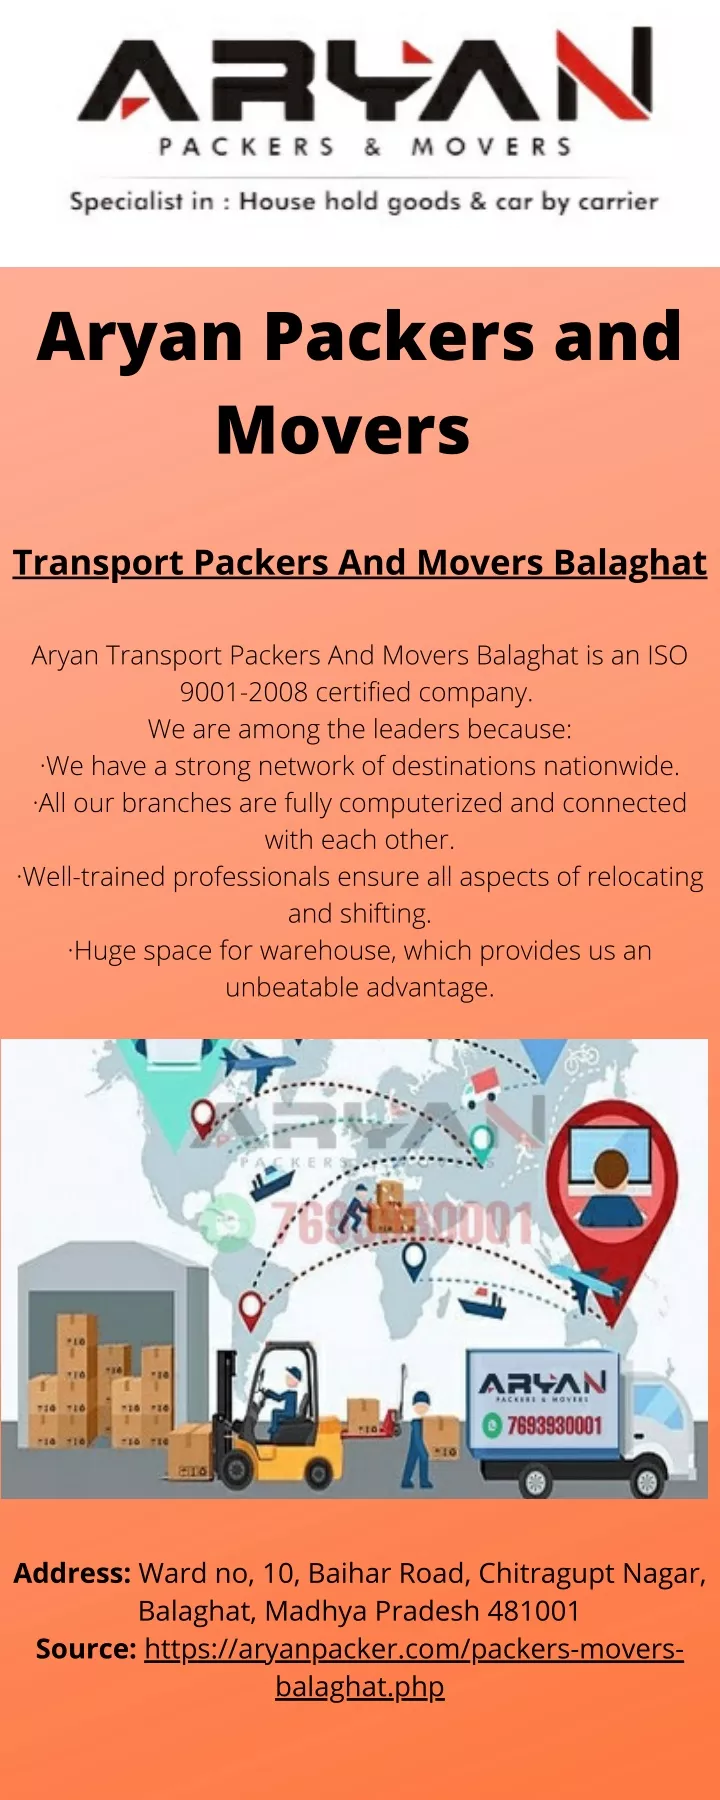 aryan packers and movers